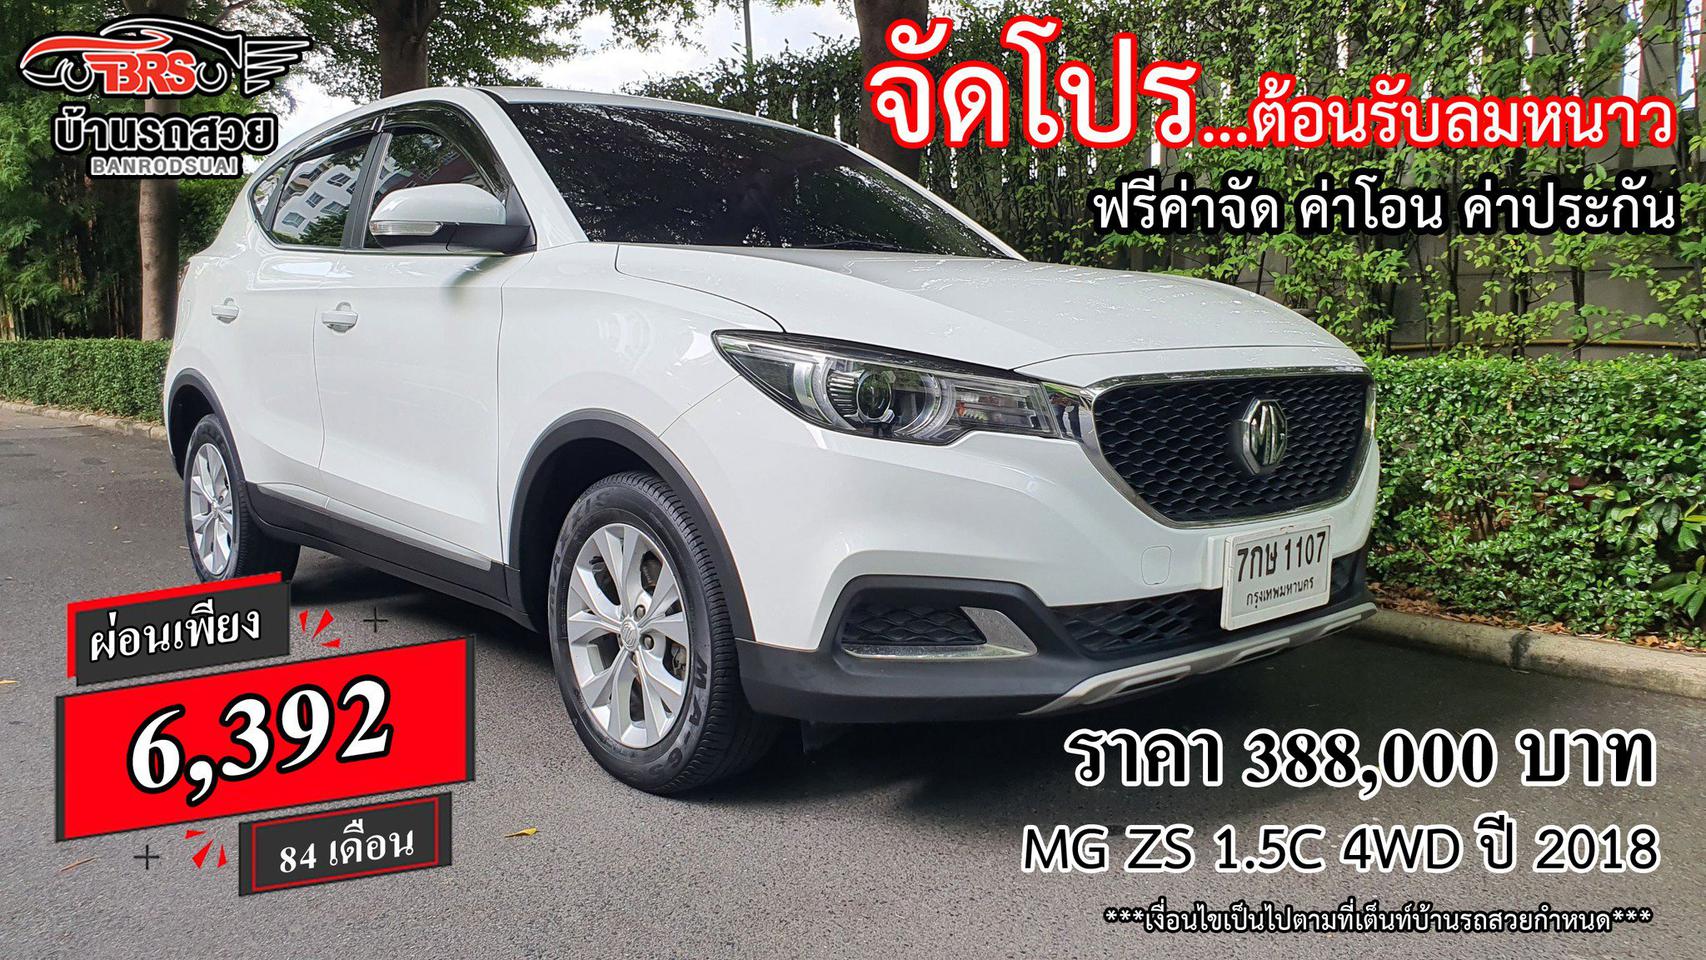 MG ZS 1.5C ปี2018 